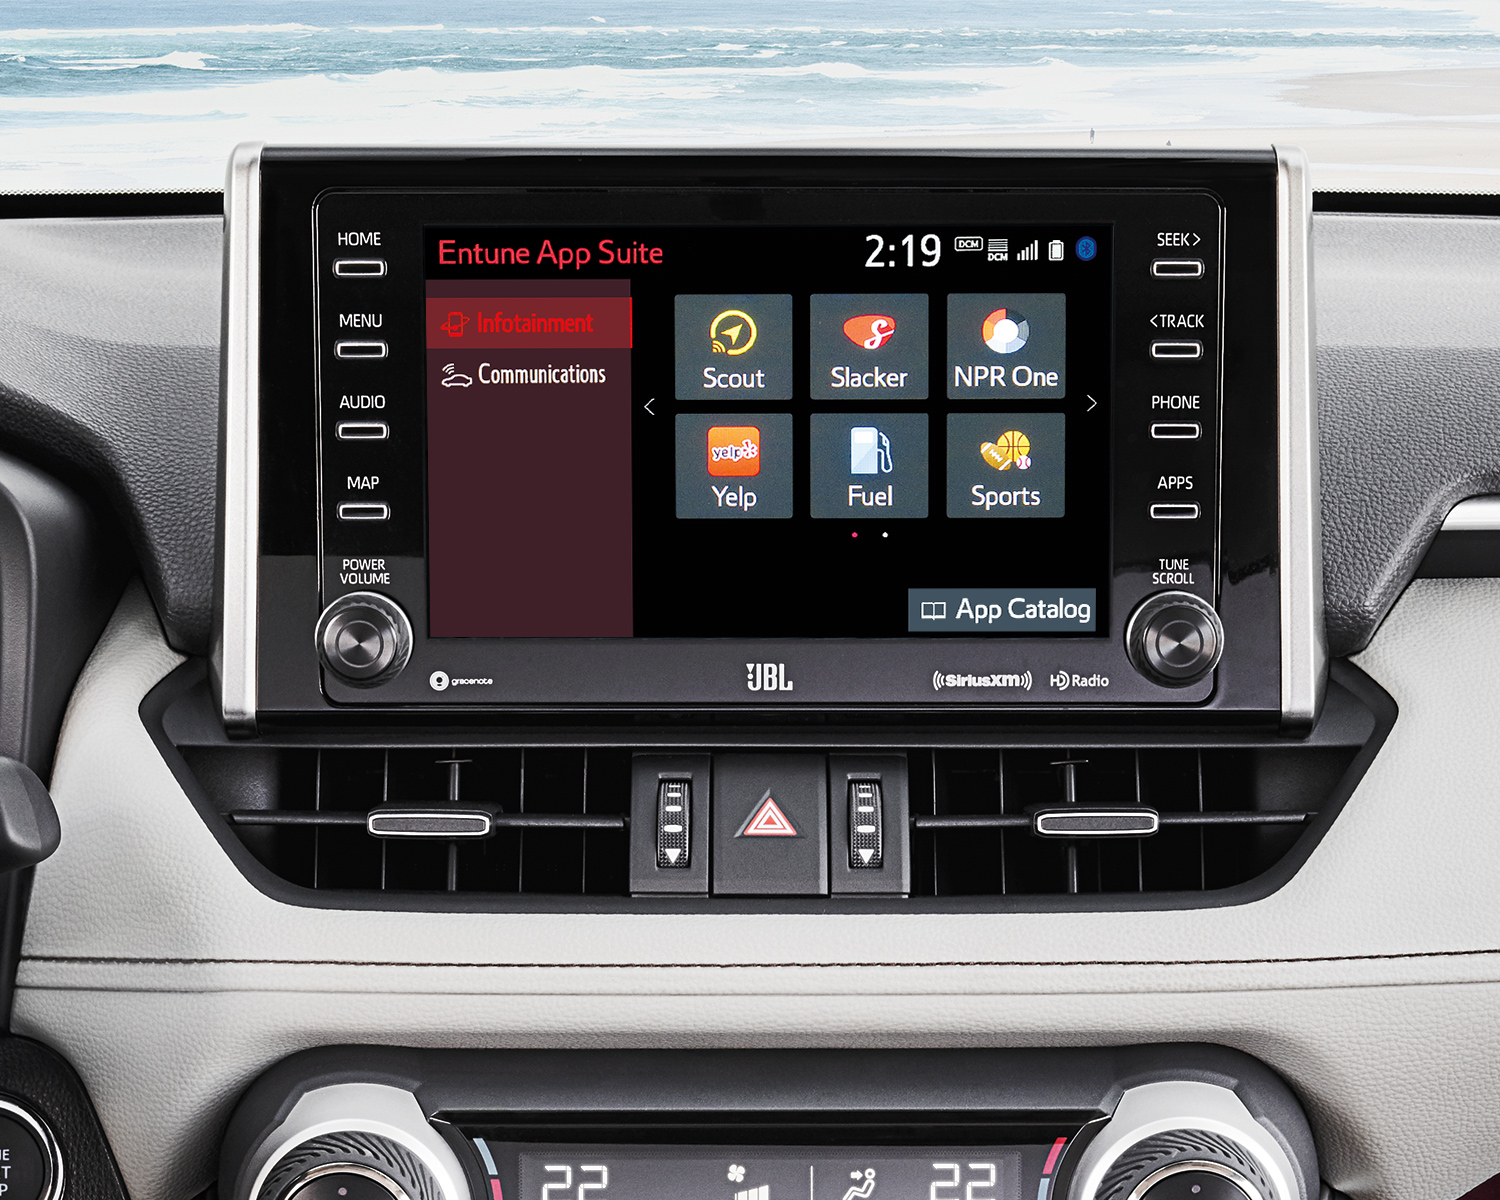 Close up of Entune 3.0 infotainment centre